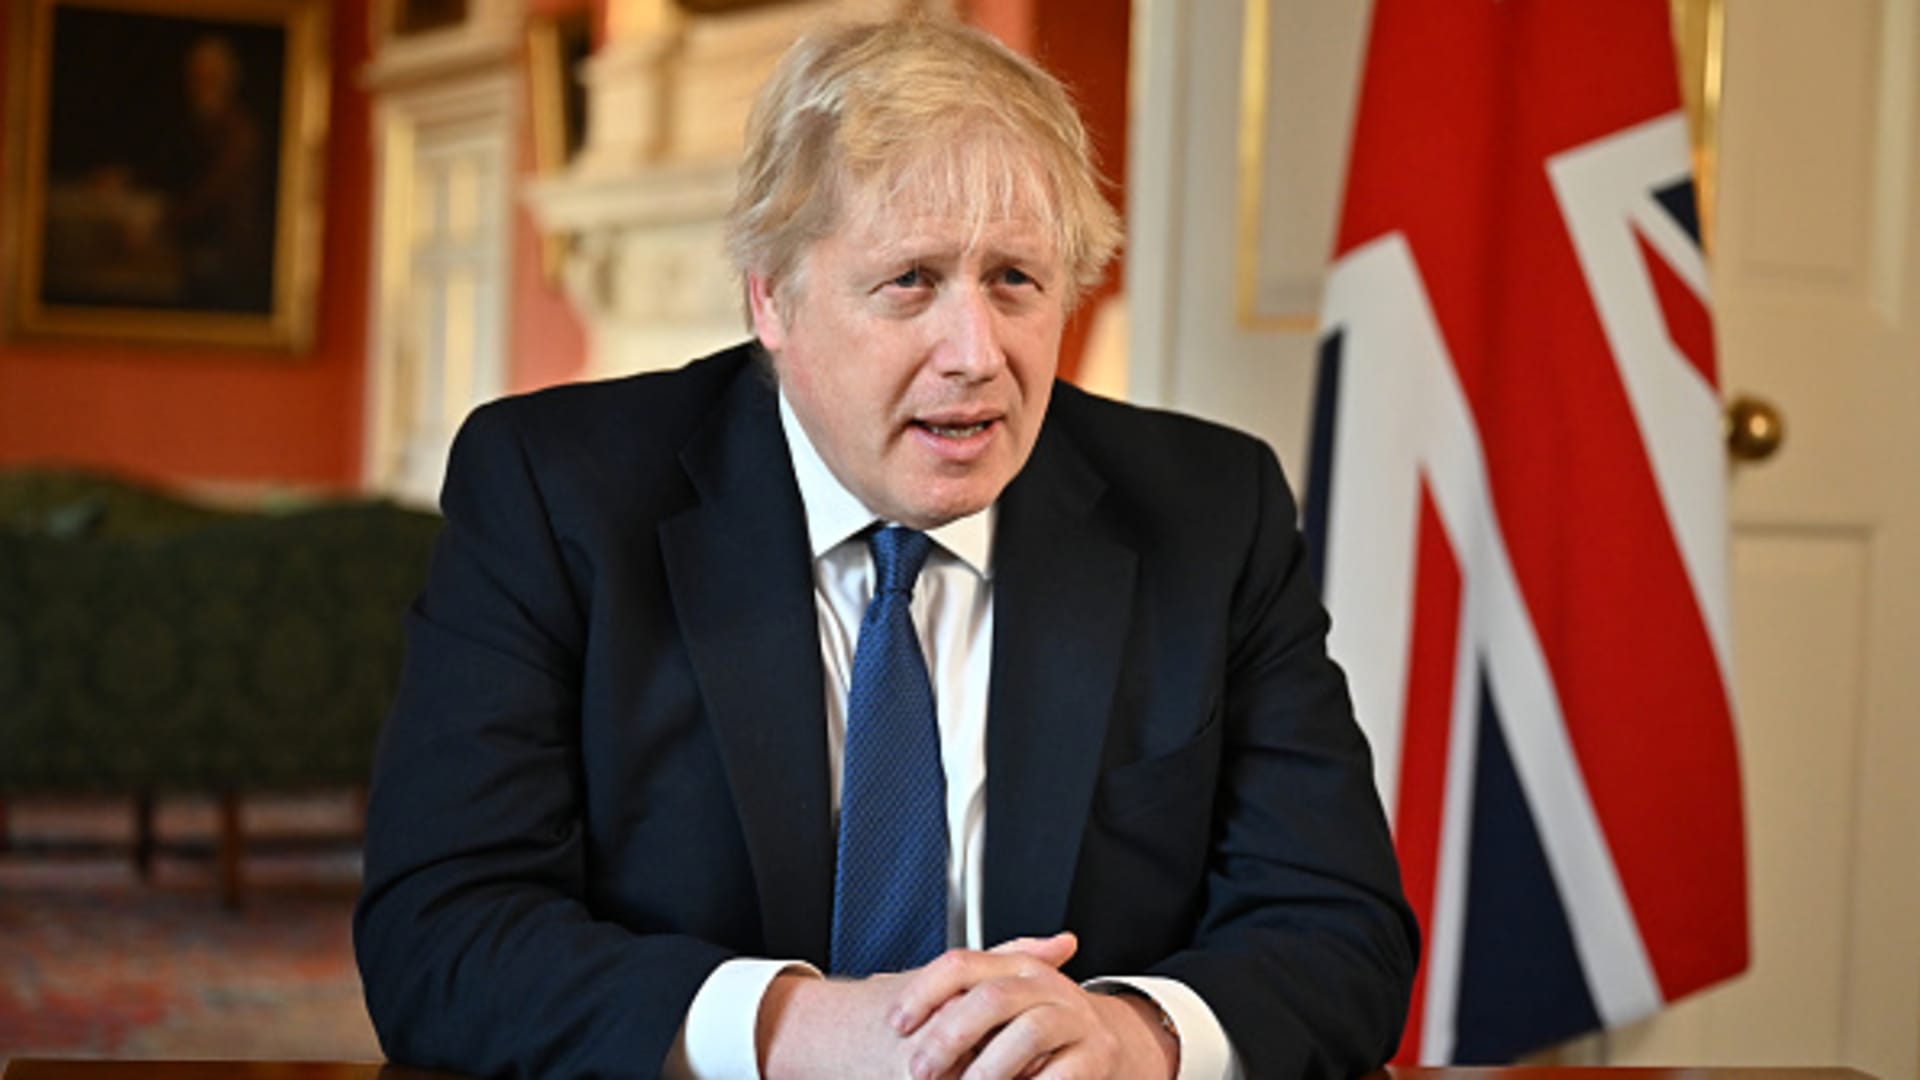 Prime Minister Boris Johnson records an address at Downing Street after he chaired an emergency Cobra meeting to discuss the UK response to the crisis in Ukraine on February 24, 2022 in London, England.